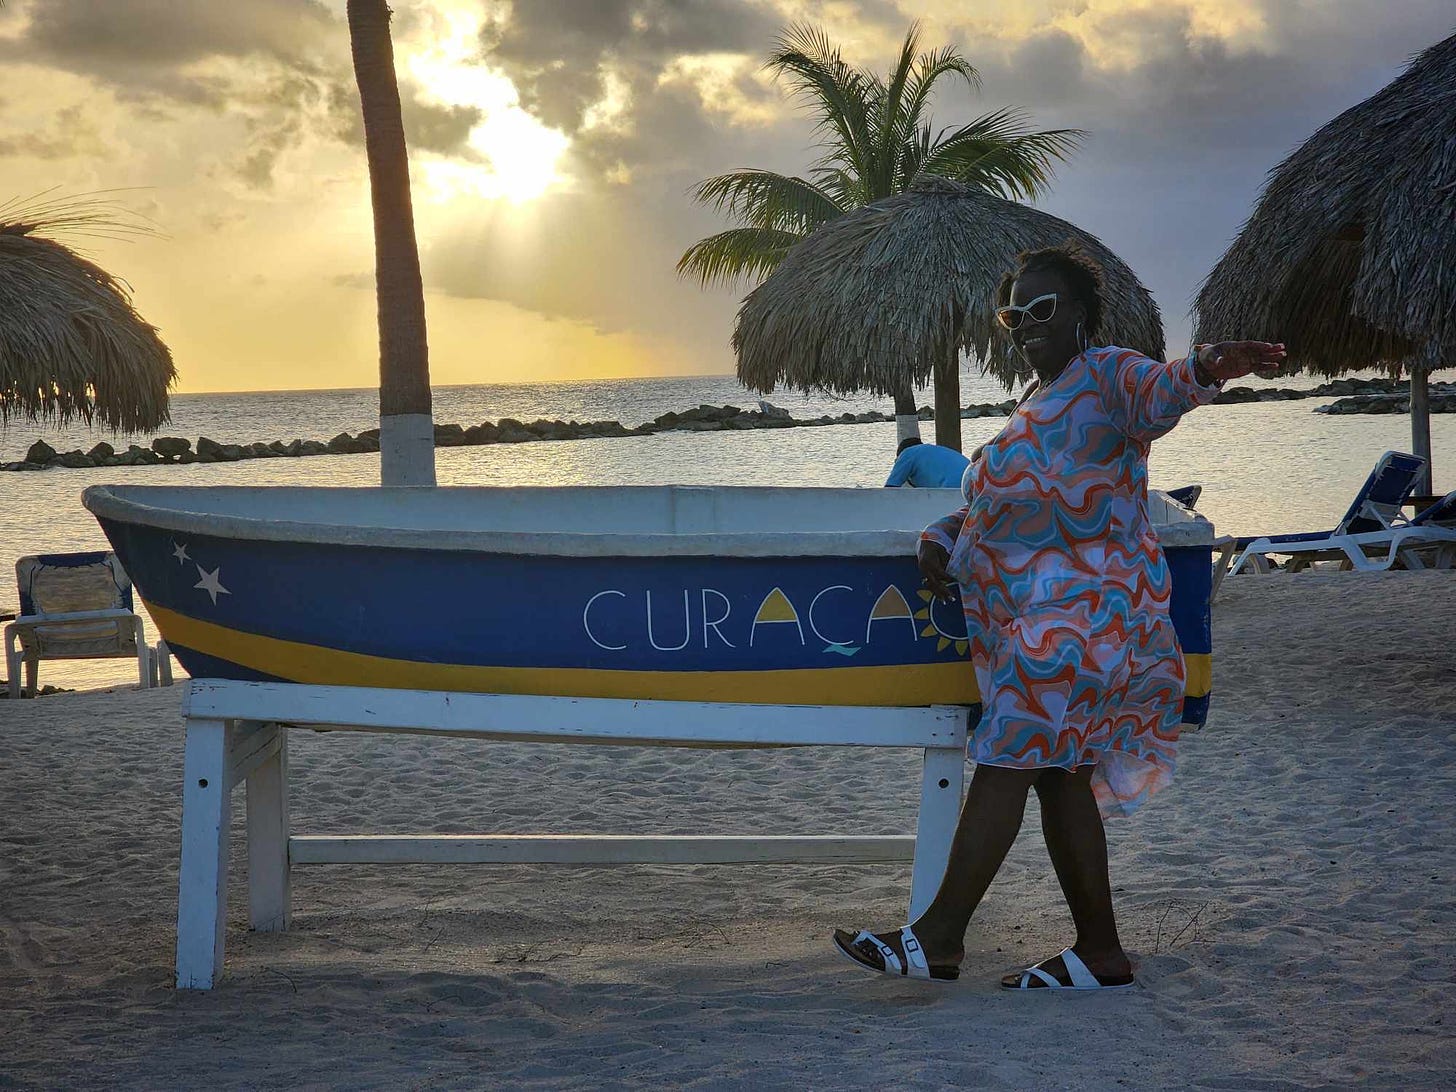 Black woman poses in front a boar that read curacao in blue and yellow. A sunset with palm tree is in the photo's background